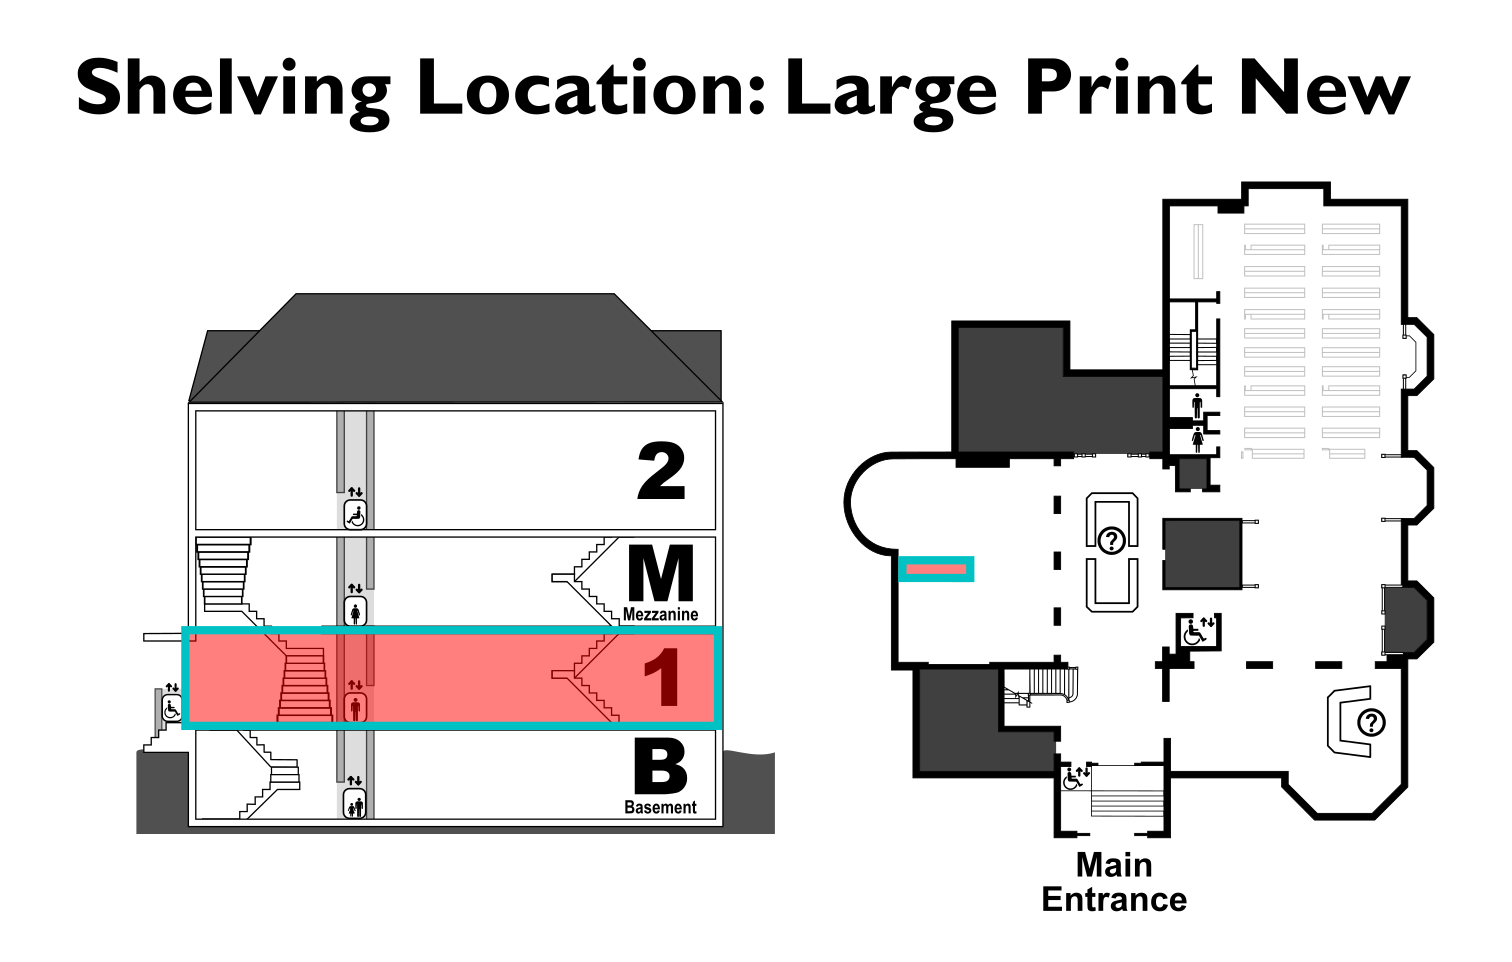 map showing location of Large Print New